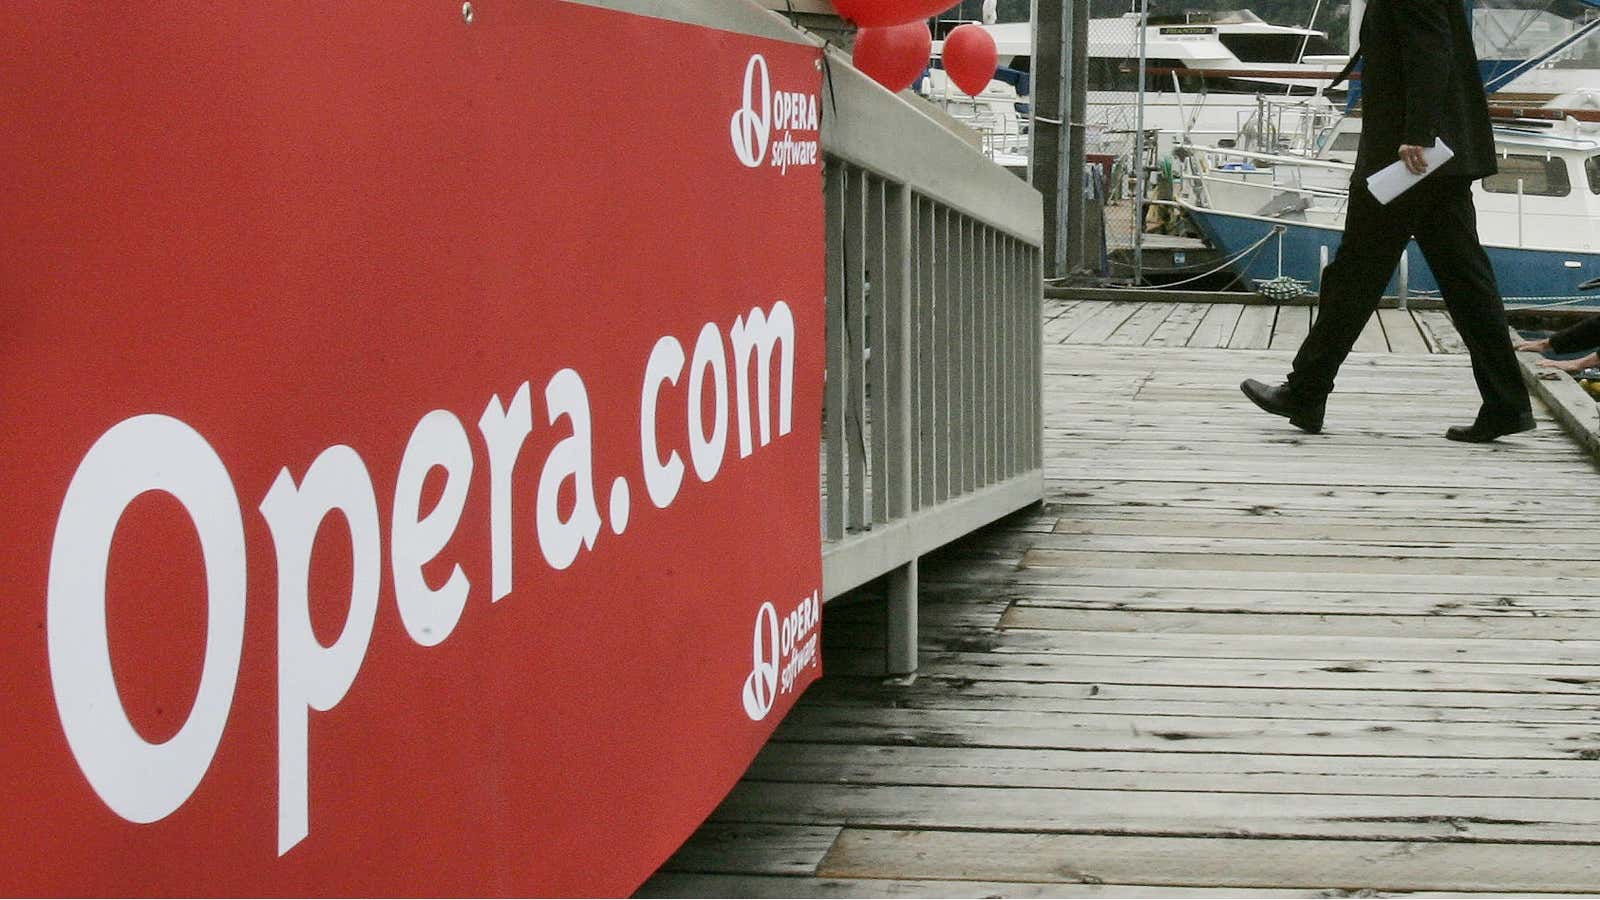 OPay was incubated by the China-owned Opera browser